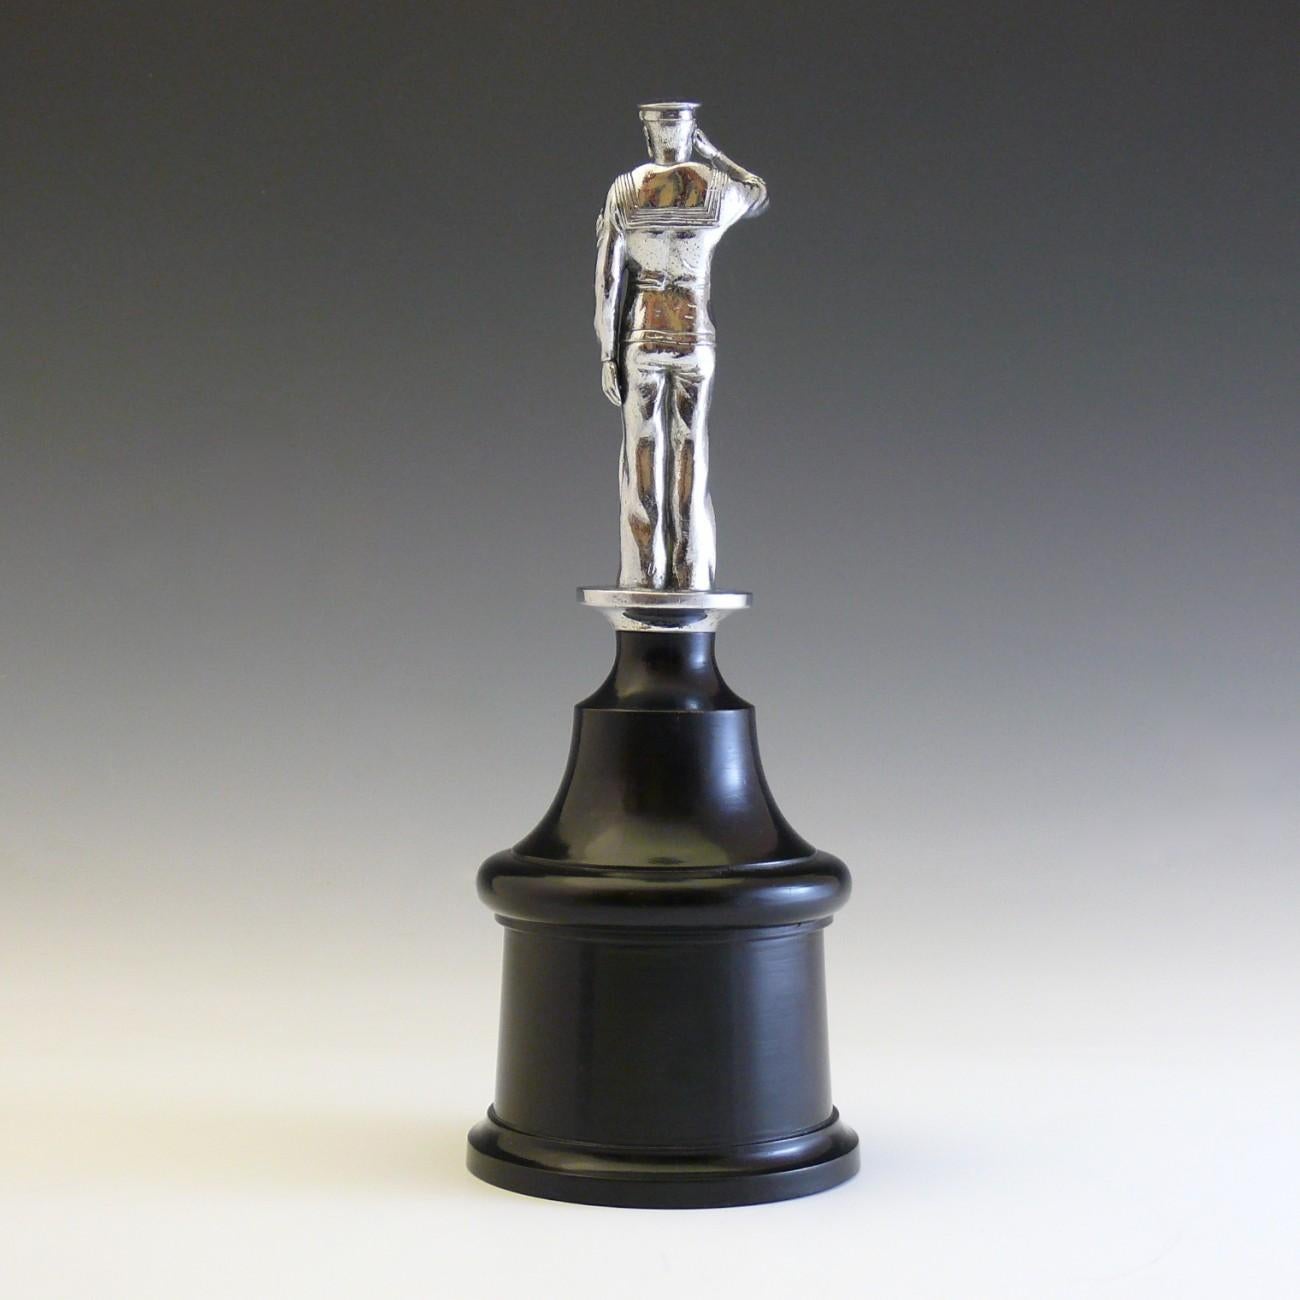 A stylish Naval car mascot mounted on an ebonised plinth for display; stamped with the name ‘Gieves’ as it was originally retailed by the renowned Savile Row tailors (and naval uniform suppliers) Gieves & Hawkes.

Dimensions: 30 cm/11¾ inches